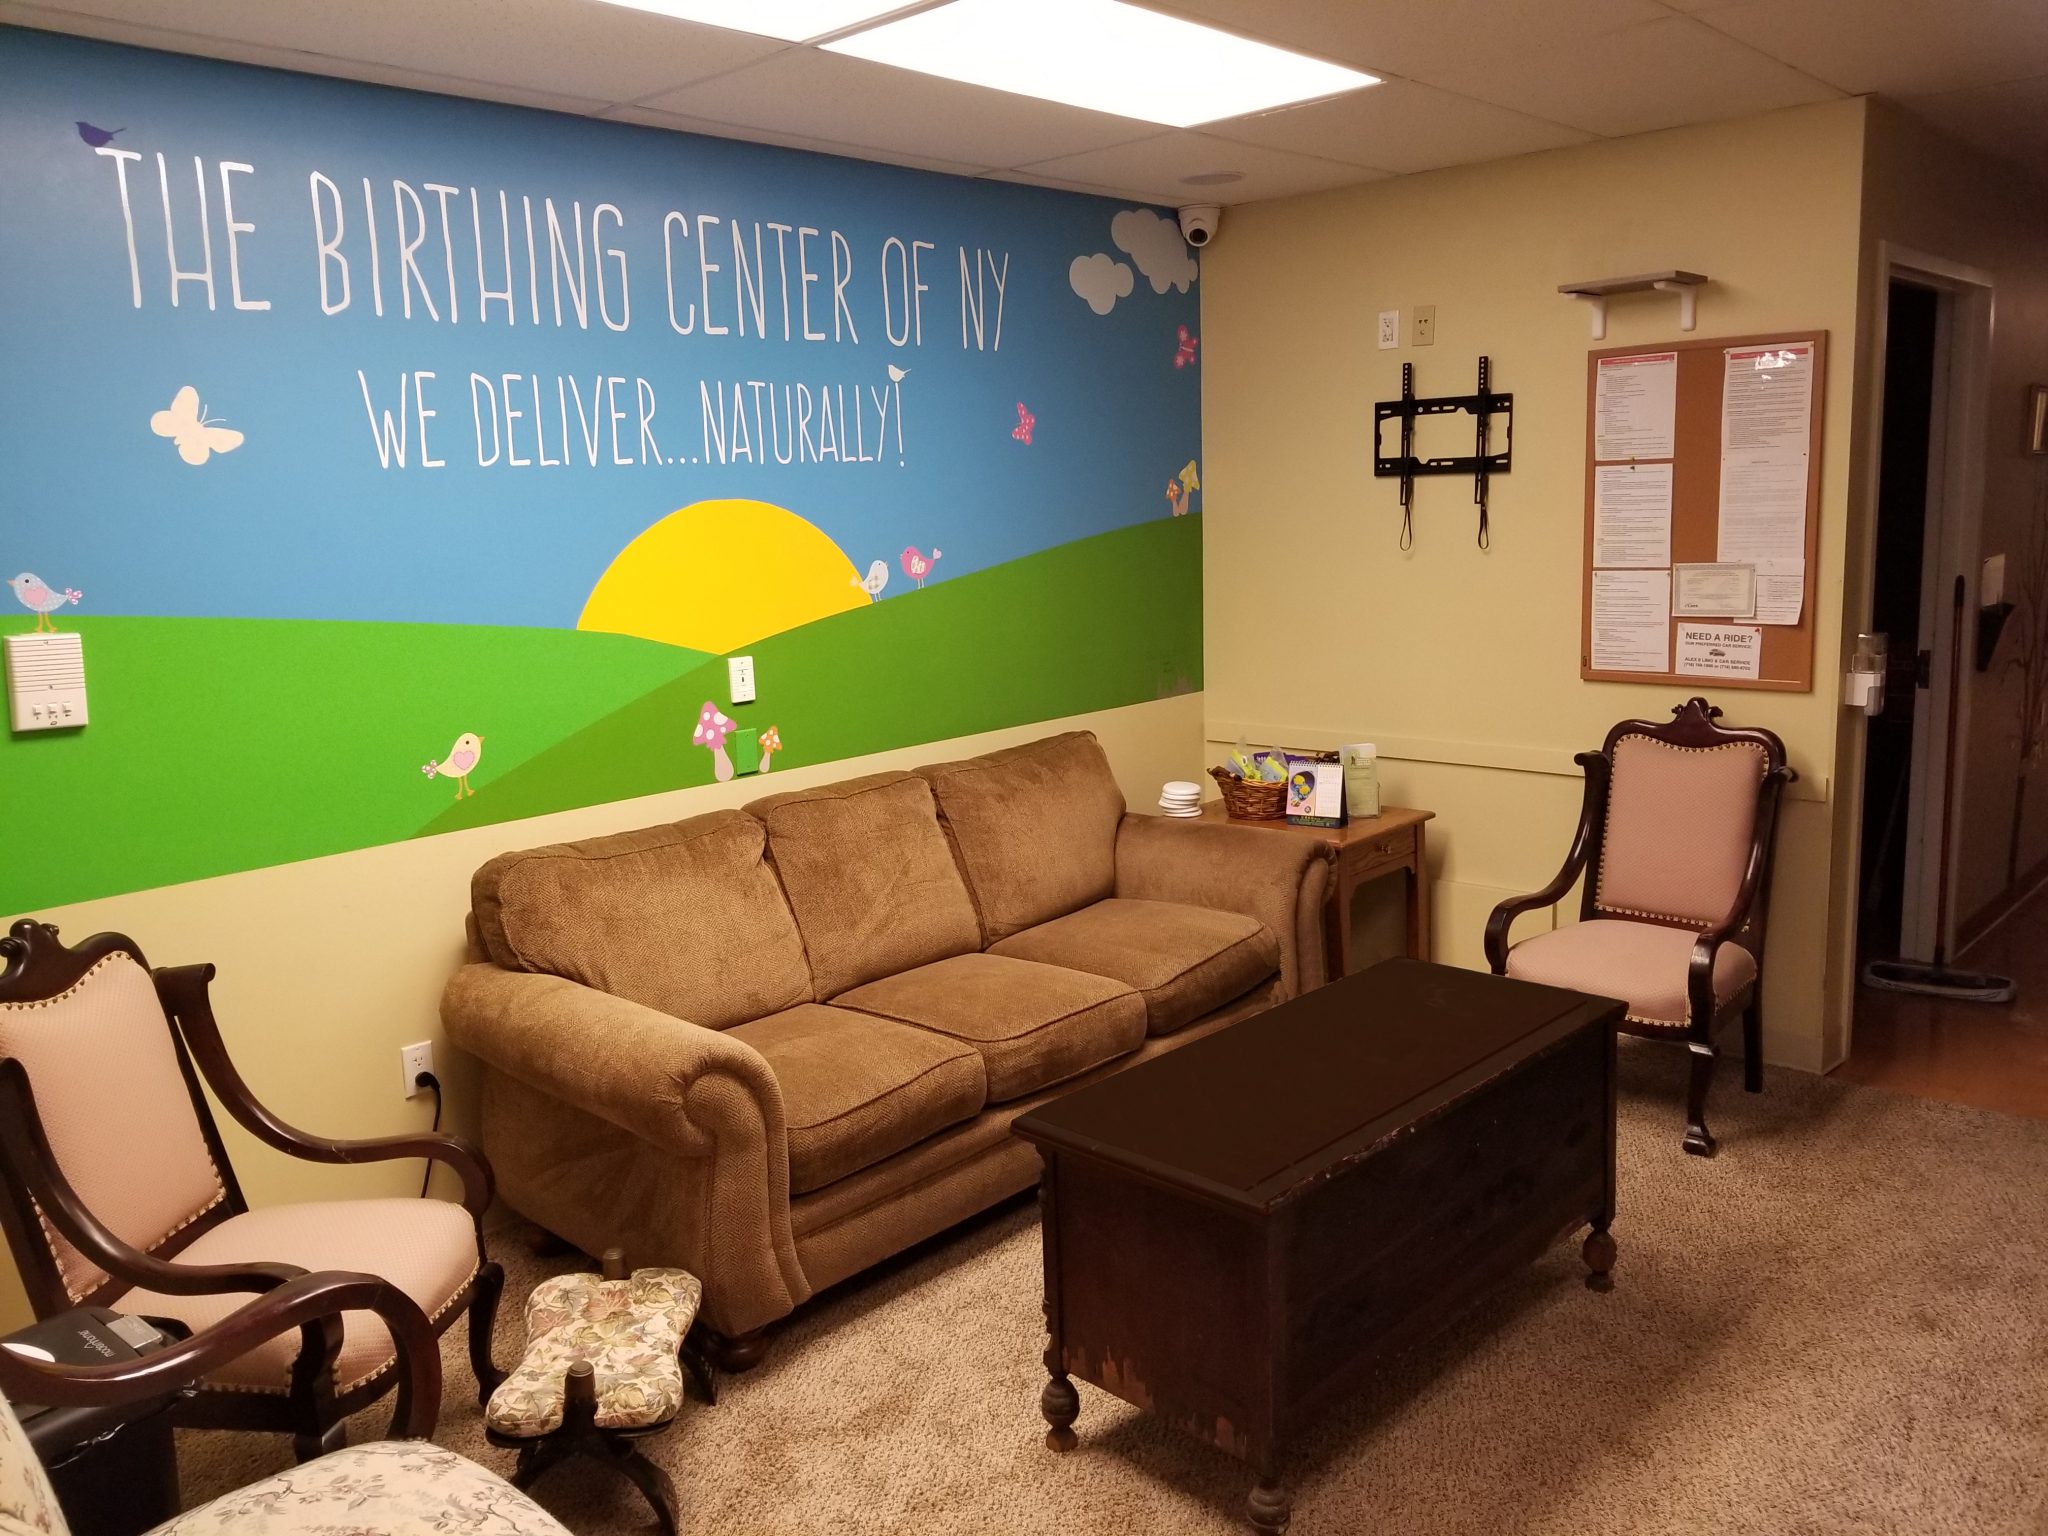 Reception Area at The Birthing Center of NY